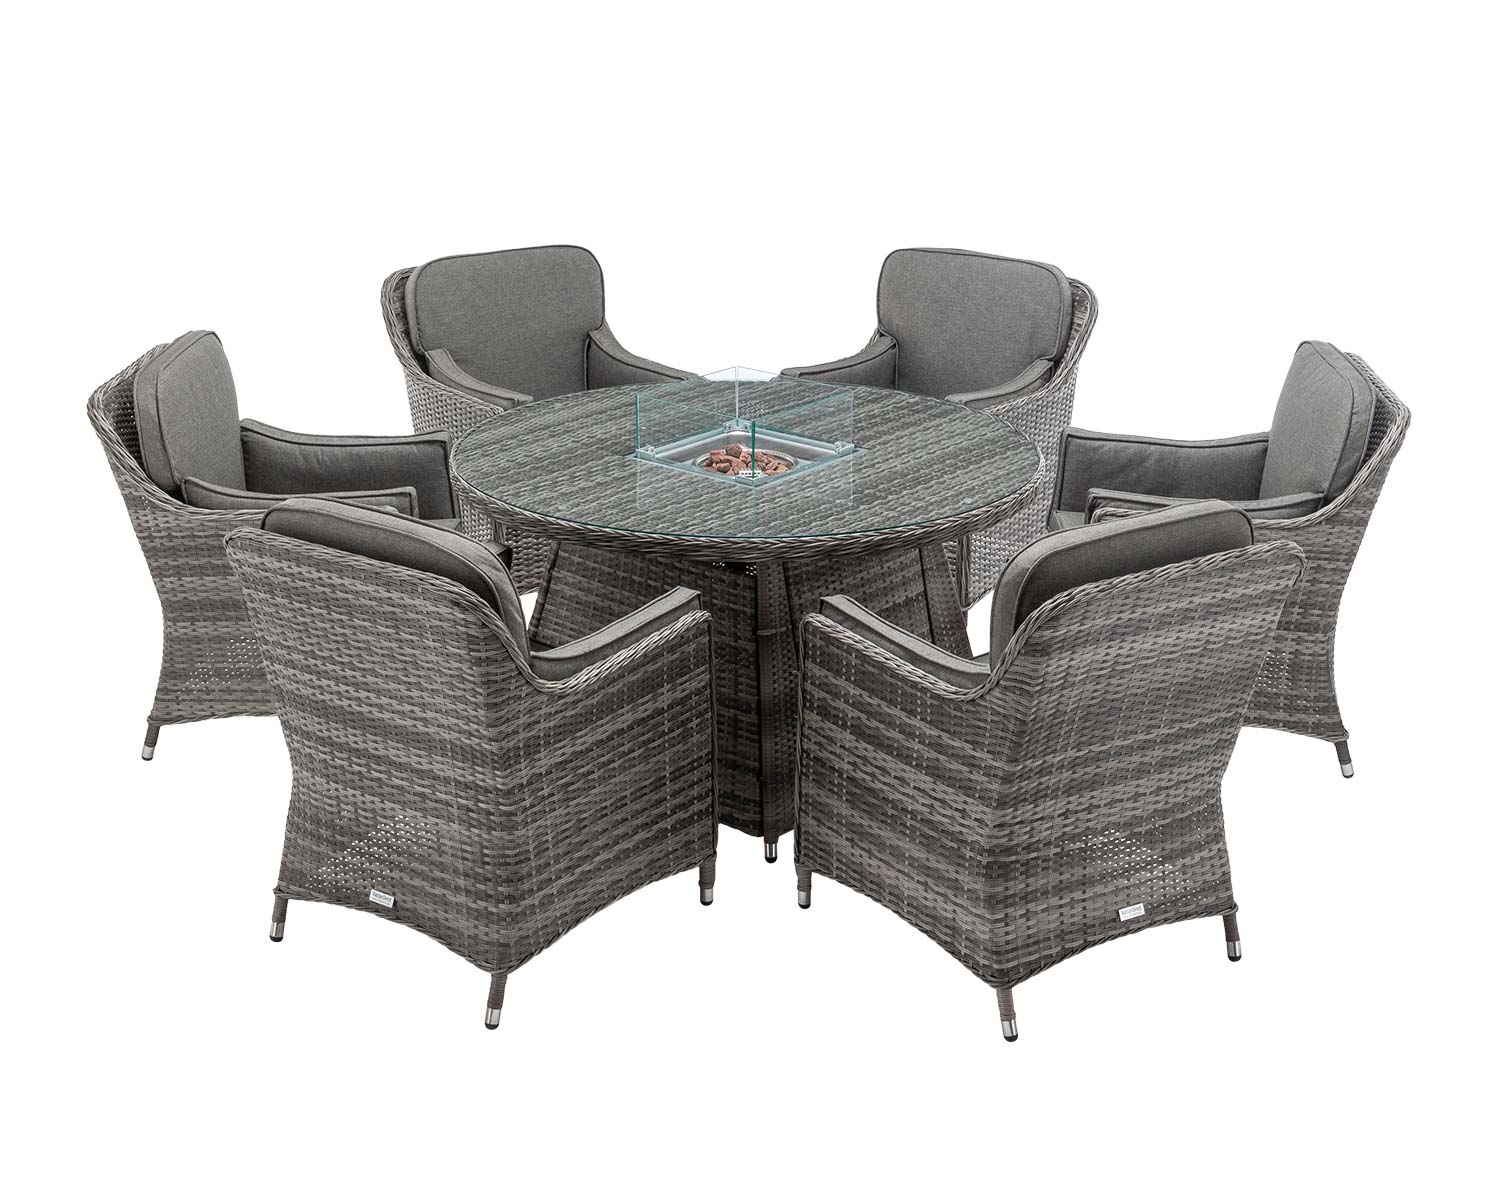 6 Seat Rattan Garden Dining Set With Round Table In Grey With Fire Pit Lyon Rattan Direct